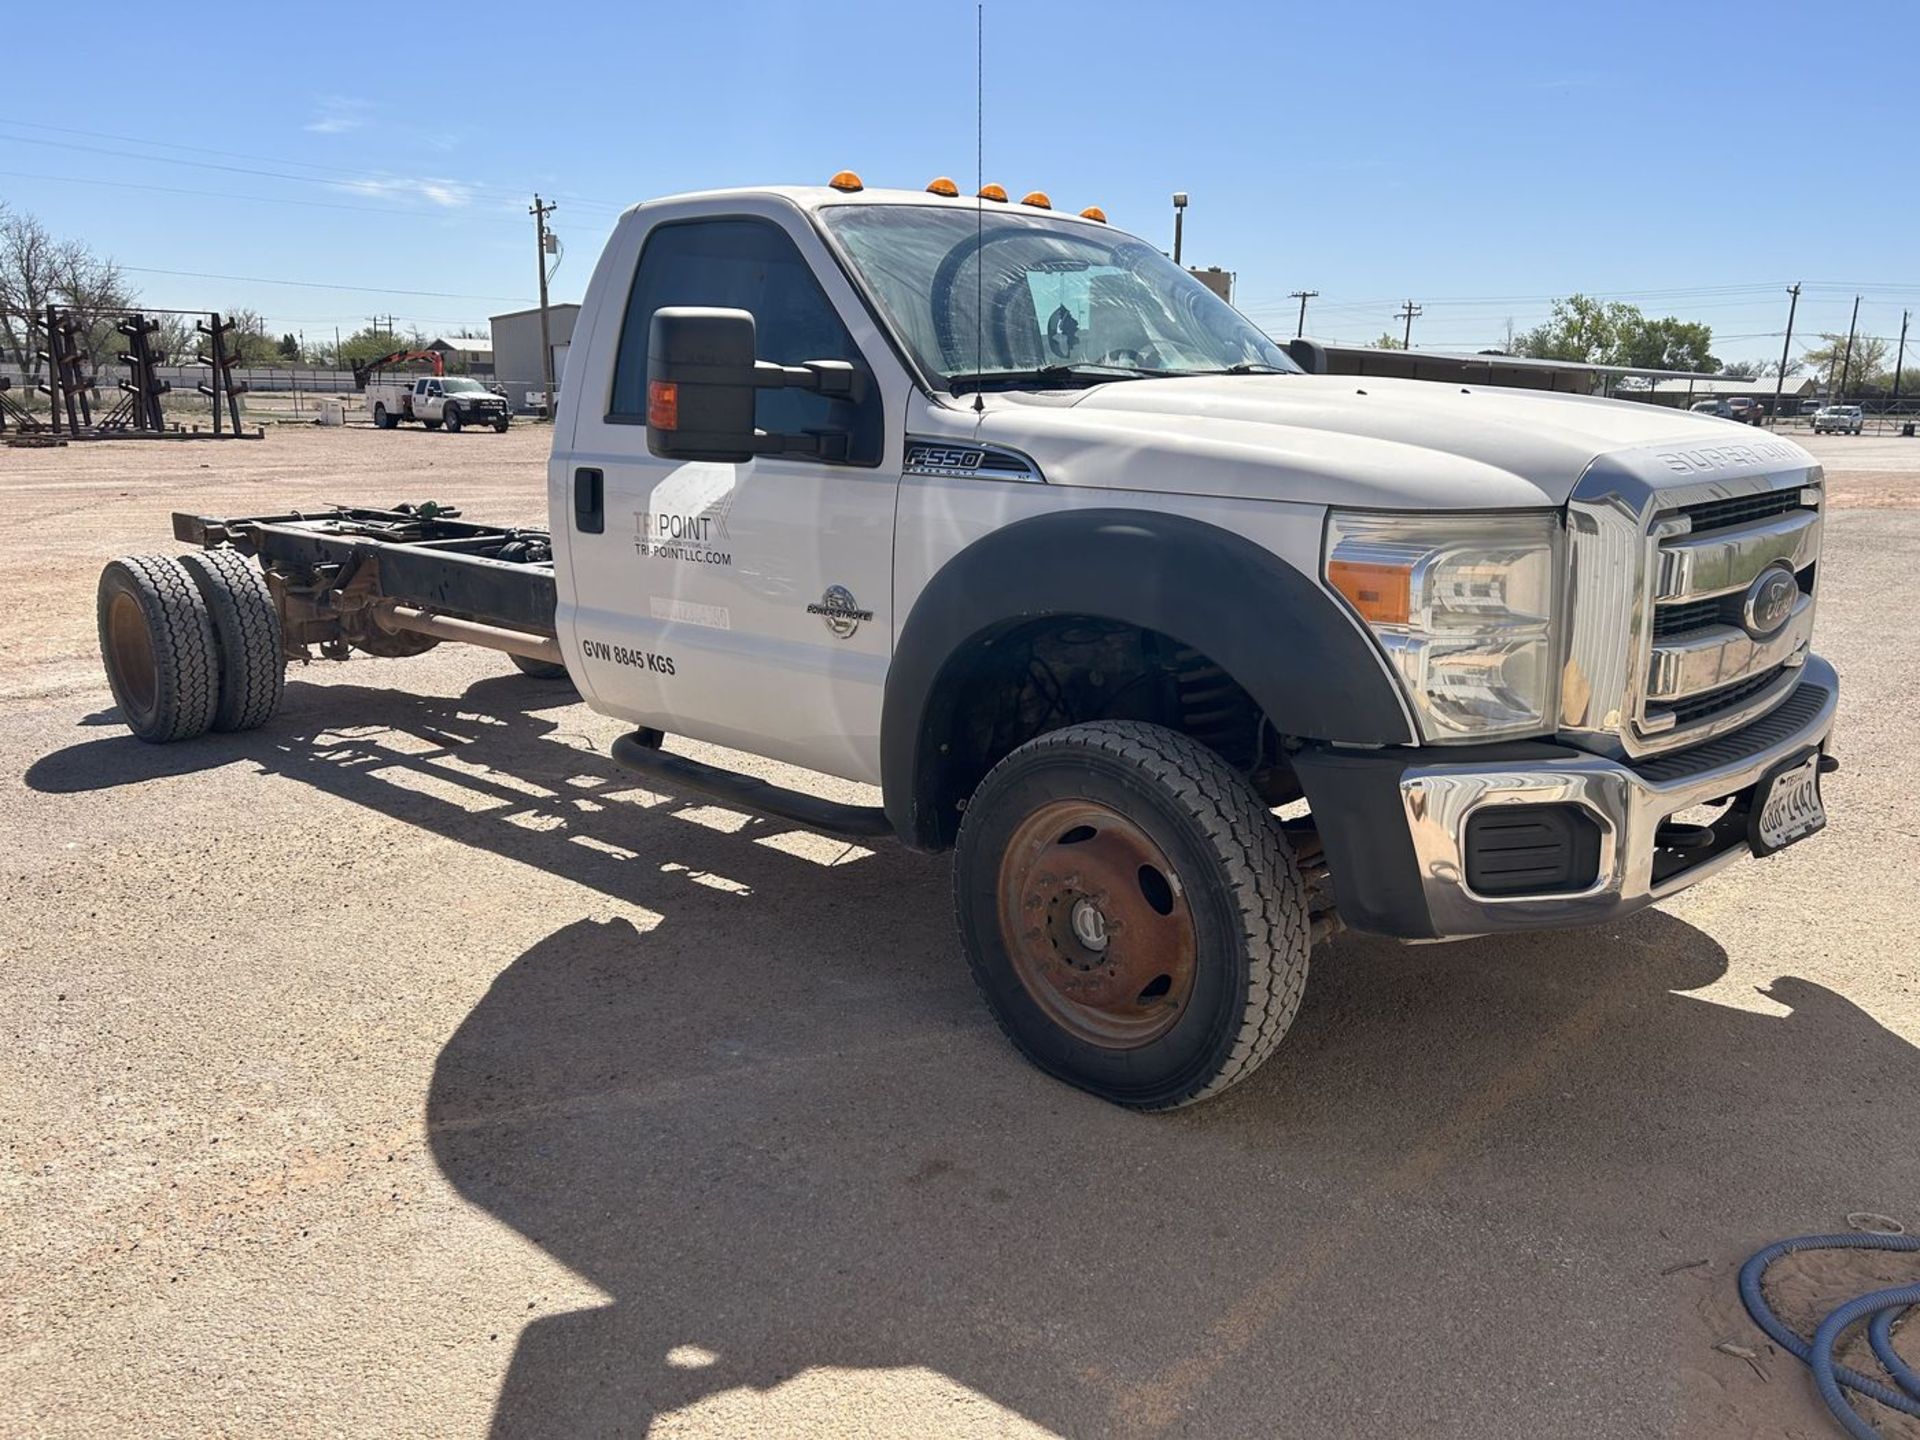 2012 Ford F-550 XLT Super Duty Regular Cab 4 x4 Truck Chassis, VIN: 1FDUF5HT5CEB01856; - Image 2 of 31